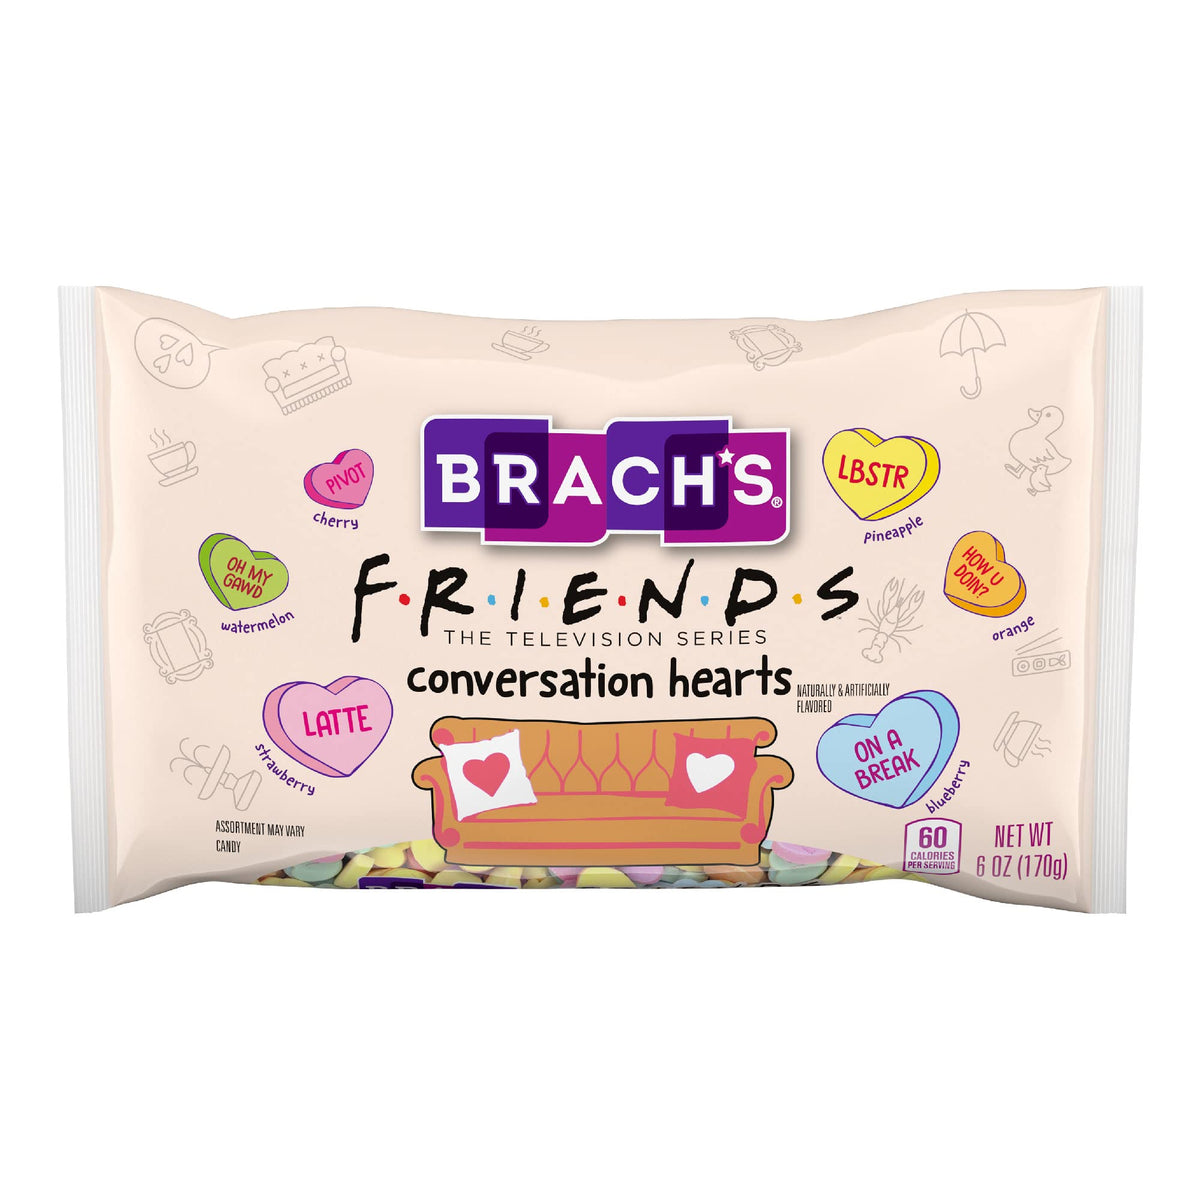 Brach's Tiny Conversation Hearts Boxes - 4 Pack 